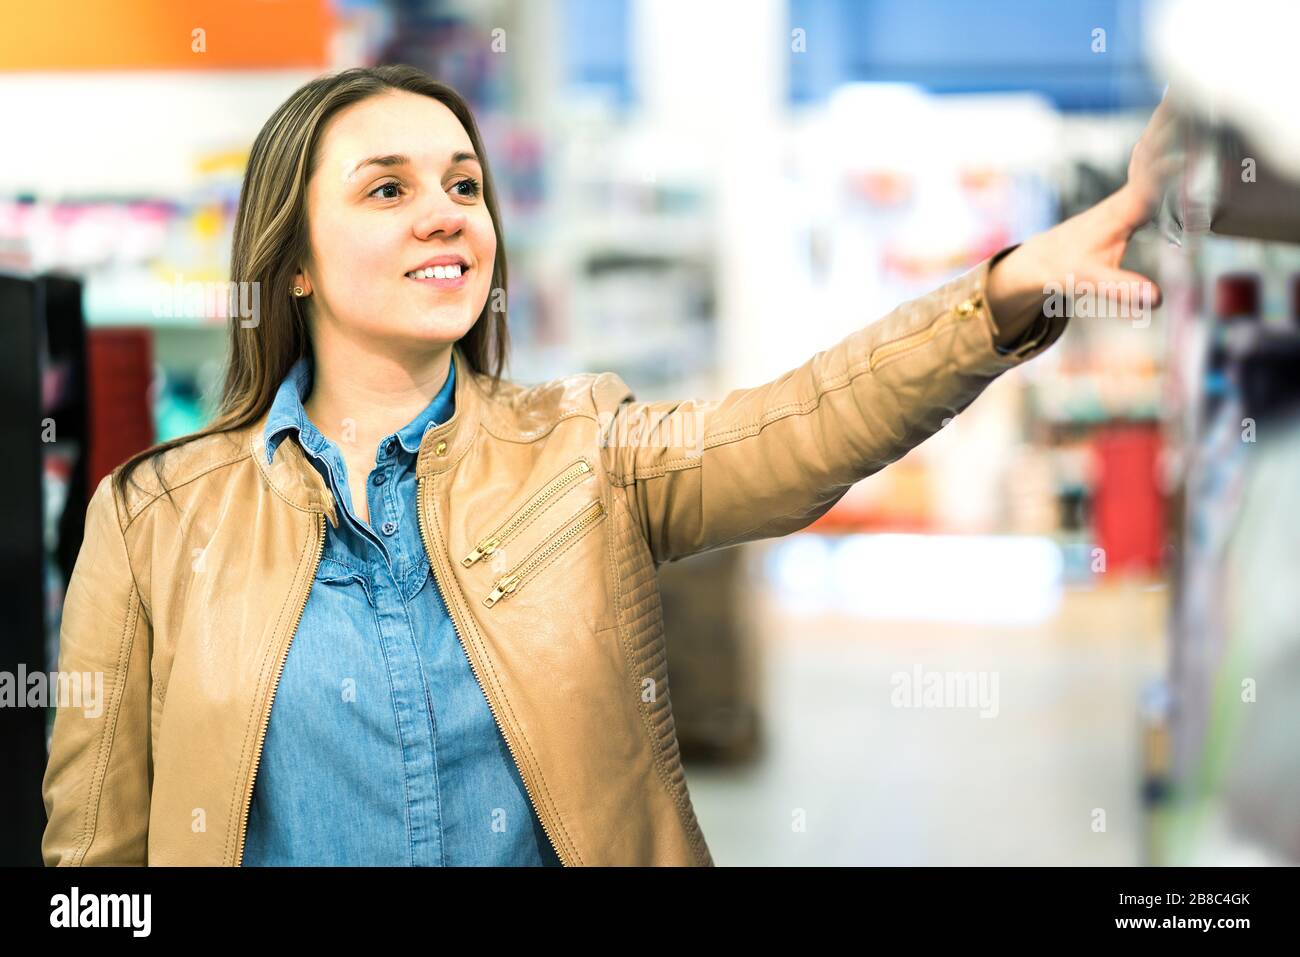 Woman at beauty product shelf in supermarket or buying medicine in pharmacy or drugstore. Smiling lady looking at cosmetics in shop aisle. Stock Photo